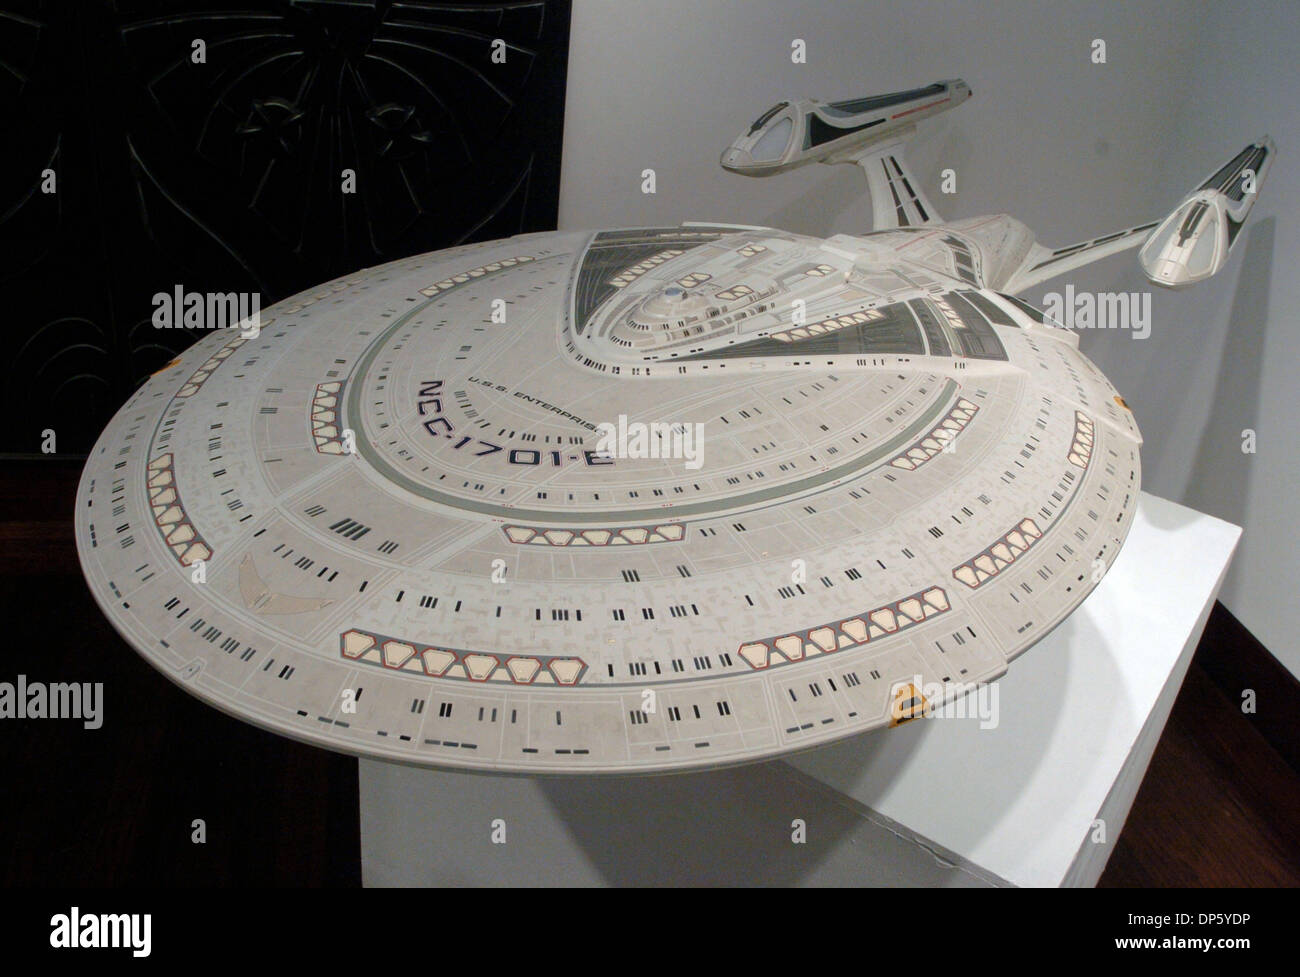 Sep 29, 2006; Manhattan, NY, USA; Starship Enterprise-E model used in 'Star Trek: First Contact', estimated to sell for US $8,000-$12,000. In celebration of the 40th Anniversary of 'Star Trek' Christie's will hold an auction of official 'Star Trek' items from the archives of CBS Paramount Television Studios. Items include material from all of the 'Star Trek' television series and m Stock Photo